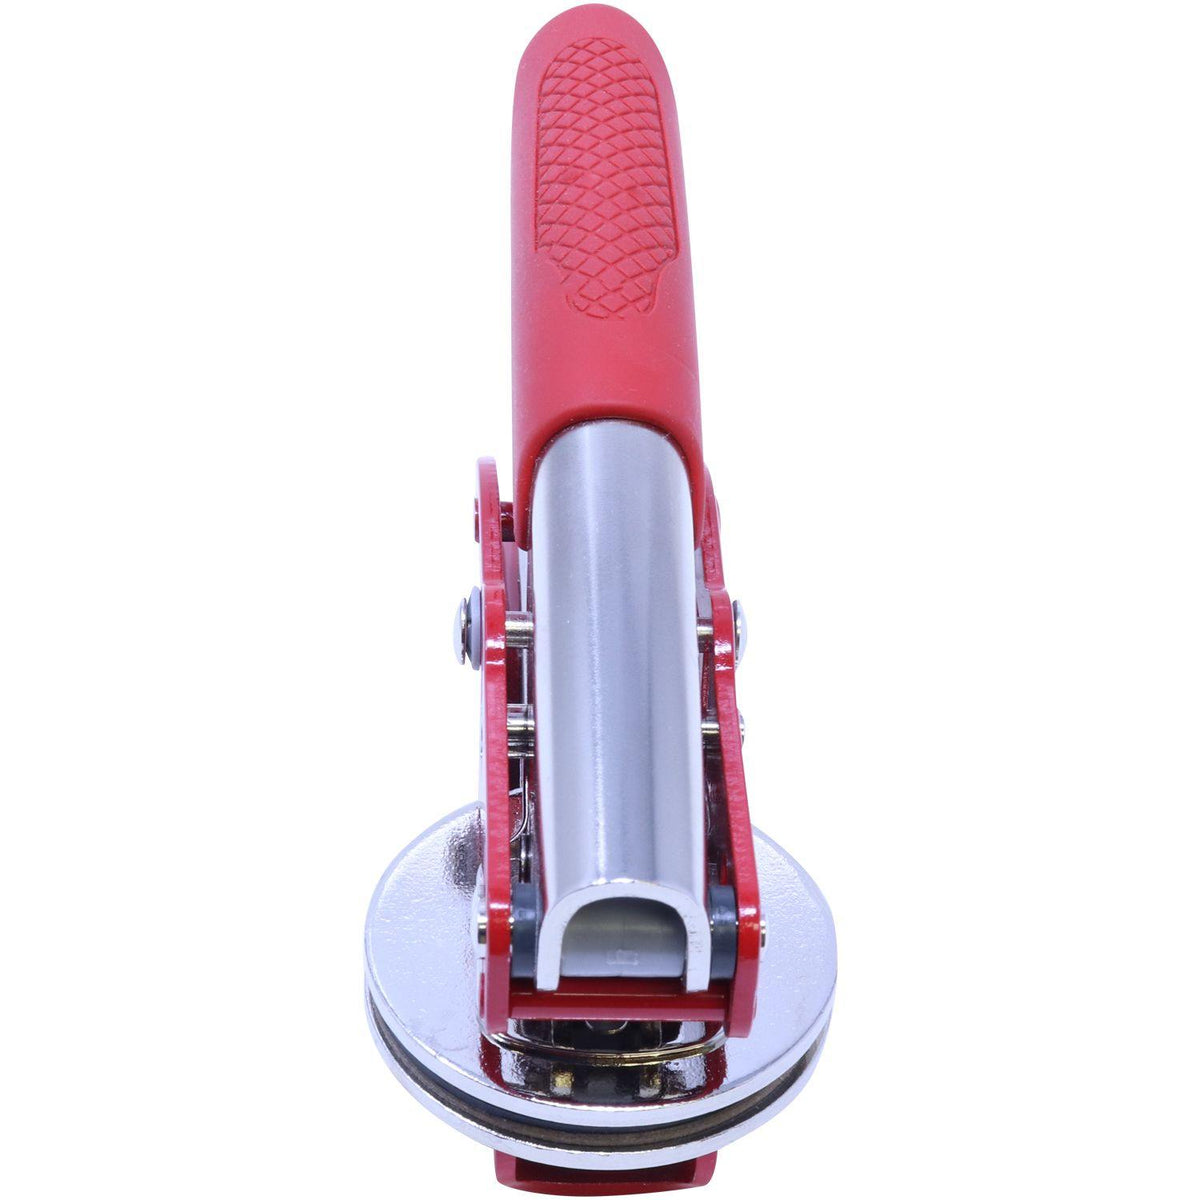 Geologist Red Soft Seal Embosser - Engineer Seal Stamps - Embosser Type_Handheld, Embosser Type_Soft Seal, Type of Use_Professional